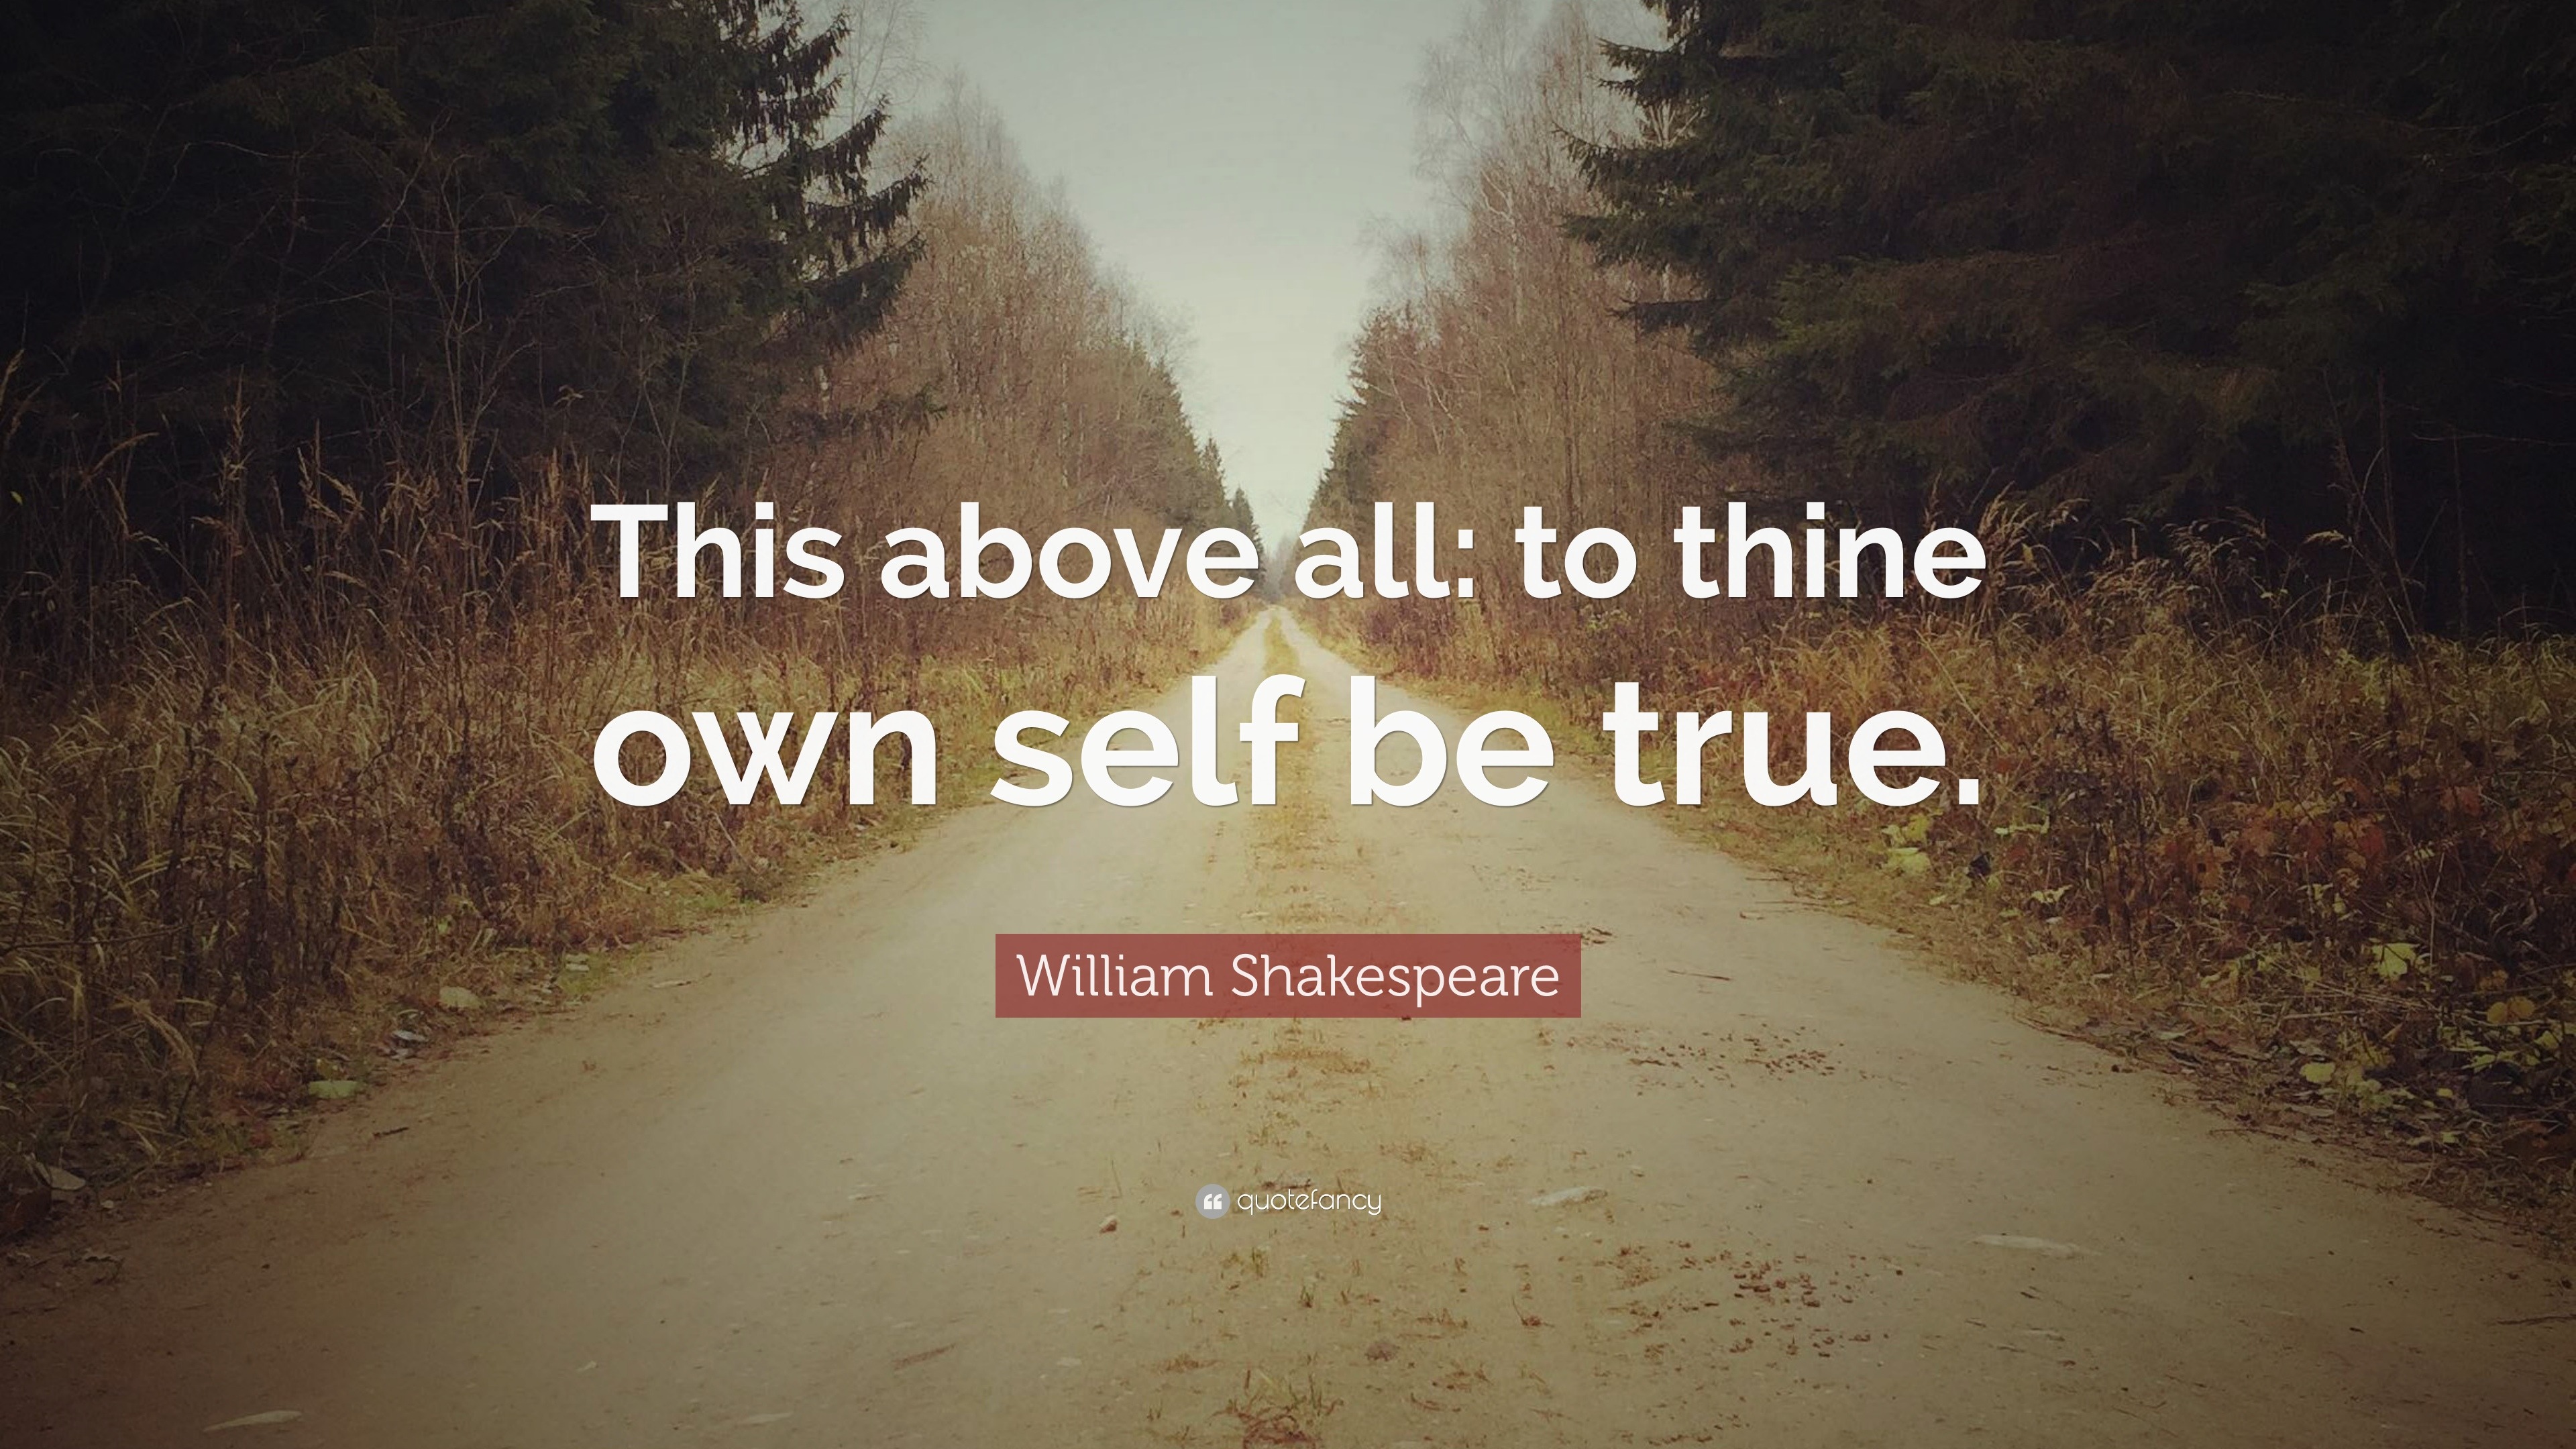 William Shakespeare Quote: “This above all: to thine own self be true.”